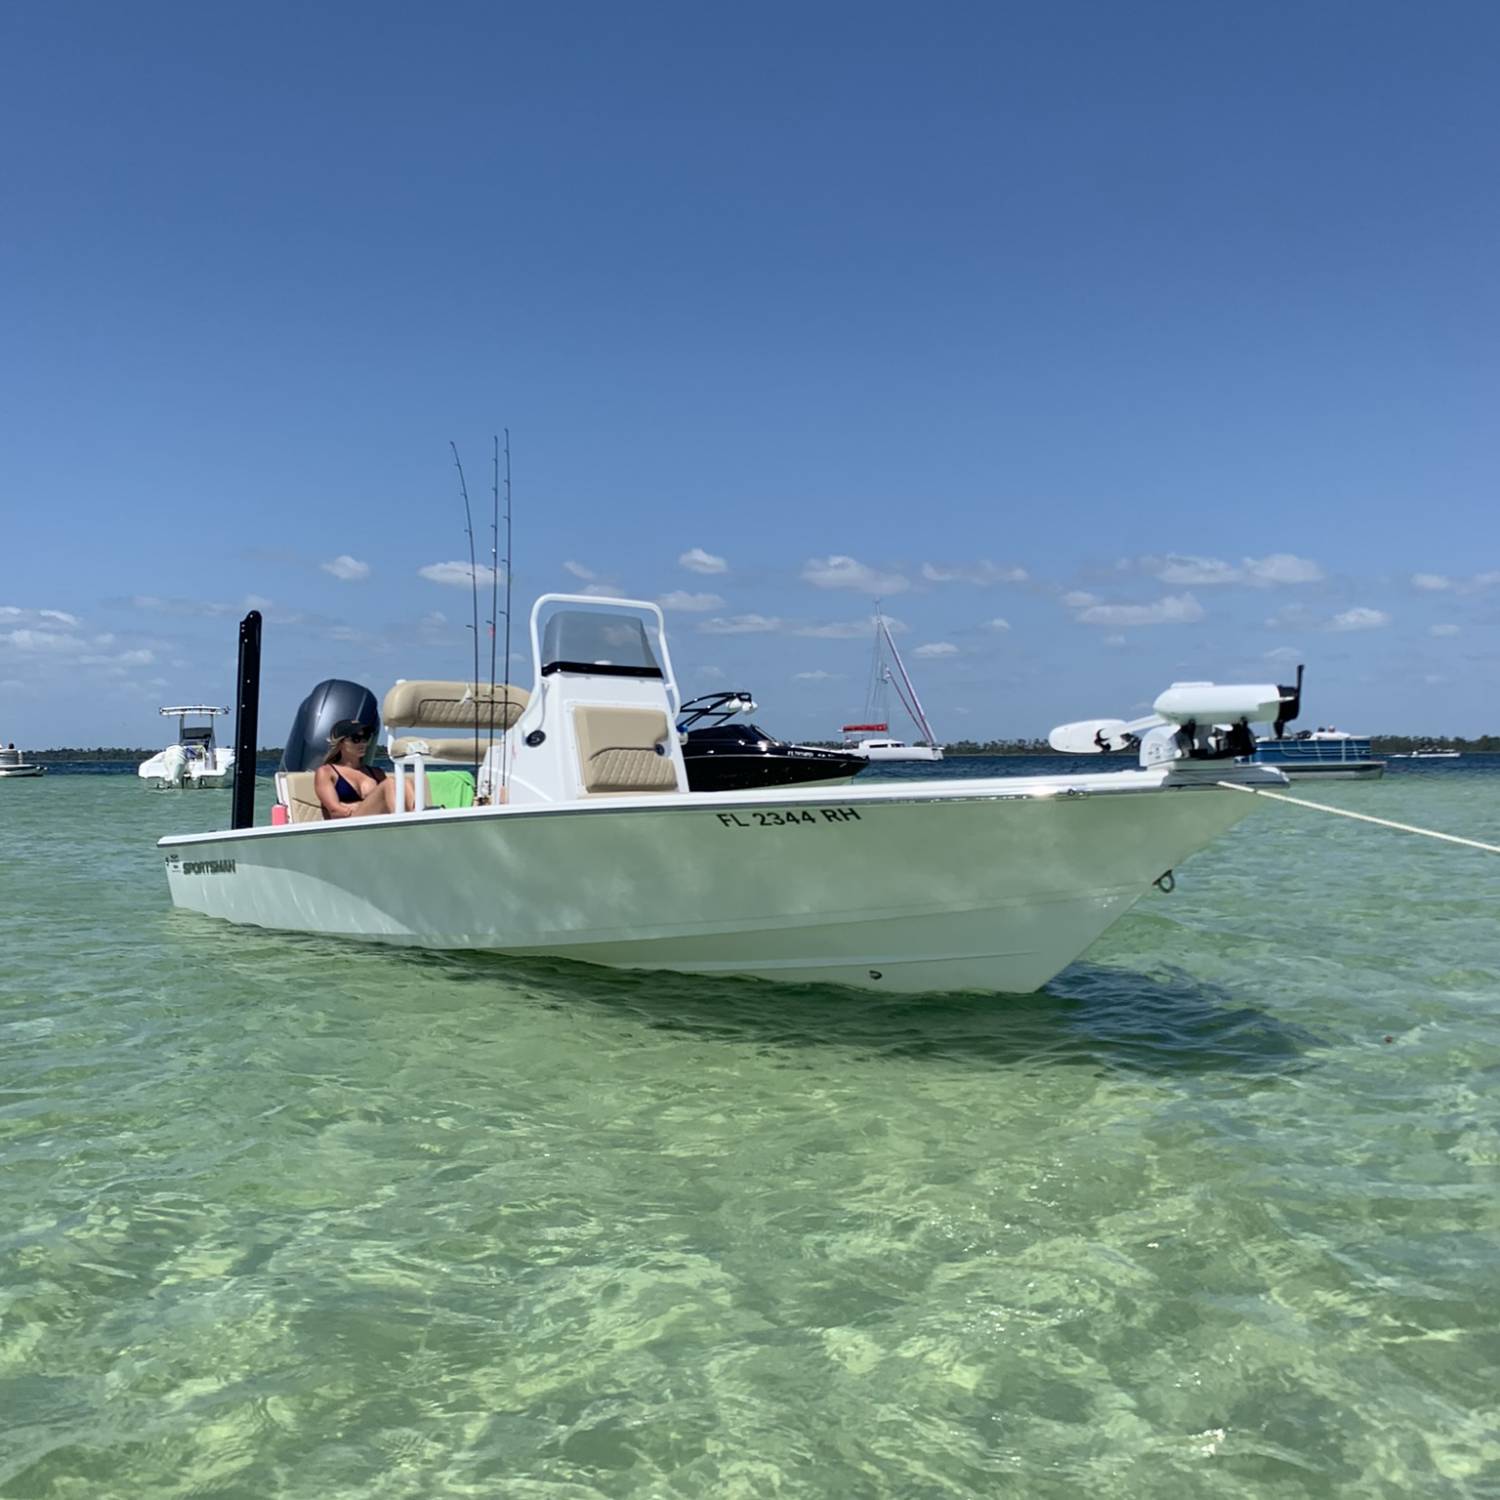 Title: Sportsman 214 Tournament - On board their Sportsman Tournament 214 Bay Boat - Location: Panama City Beach FL. Participating in the Photo Contest #SportsmanMay